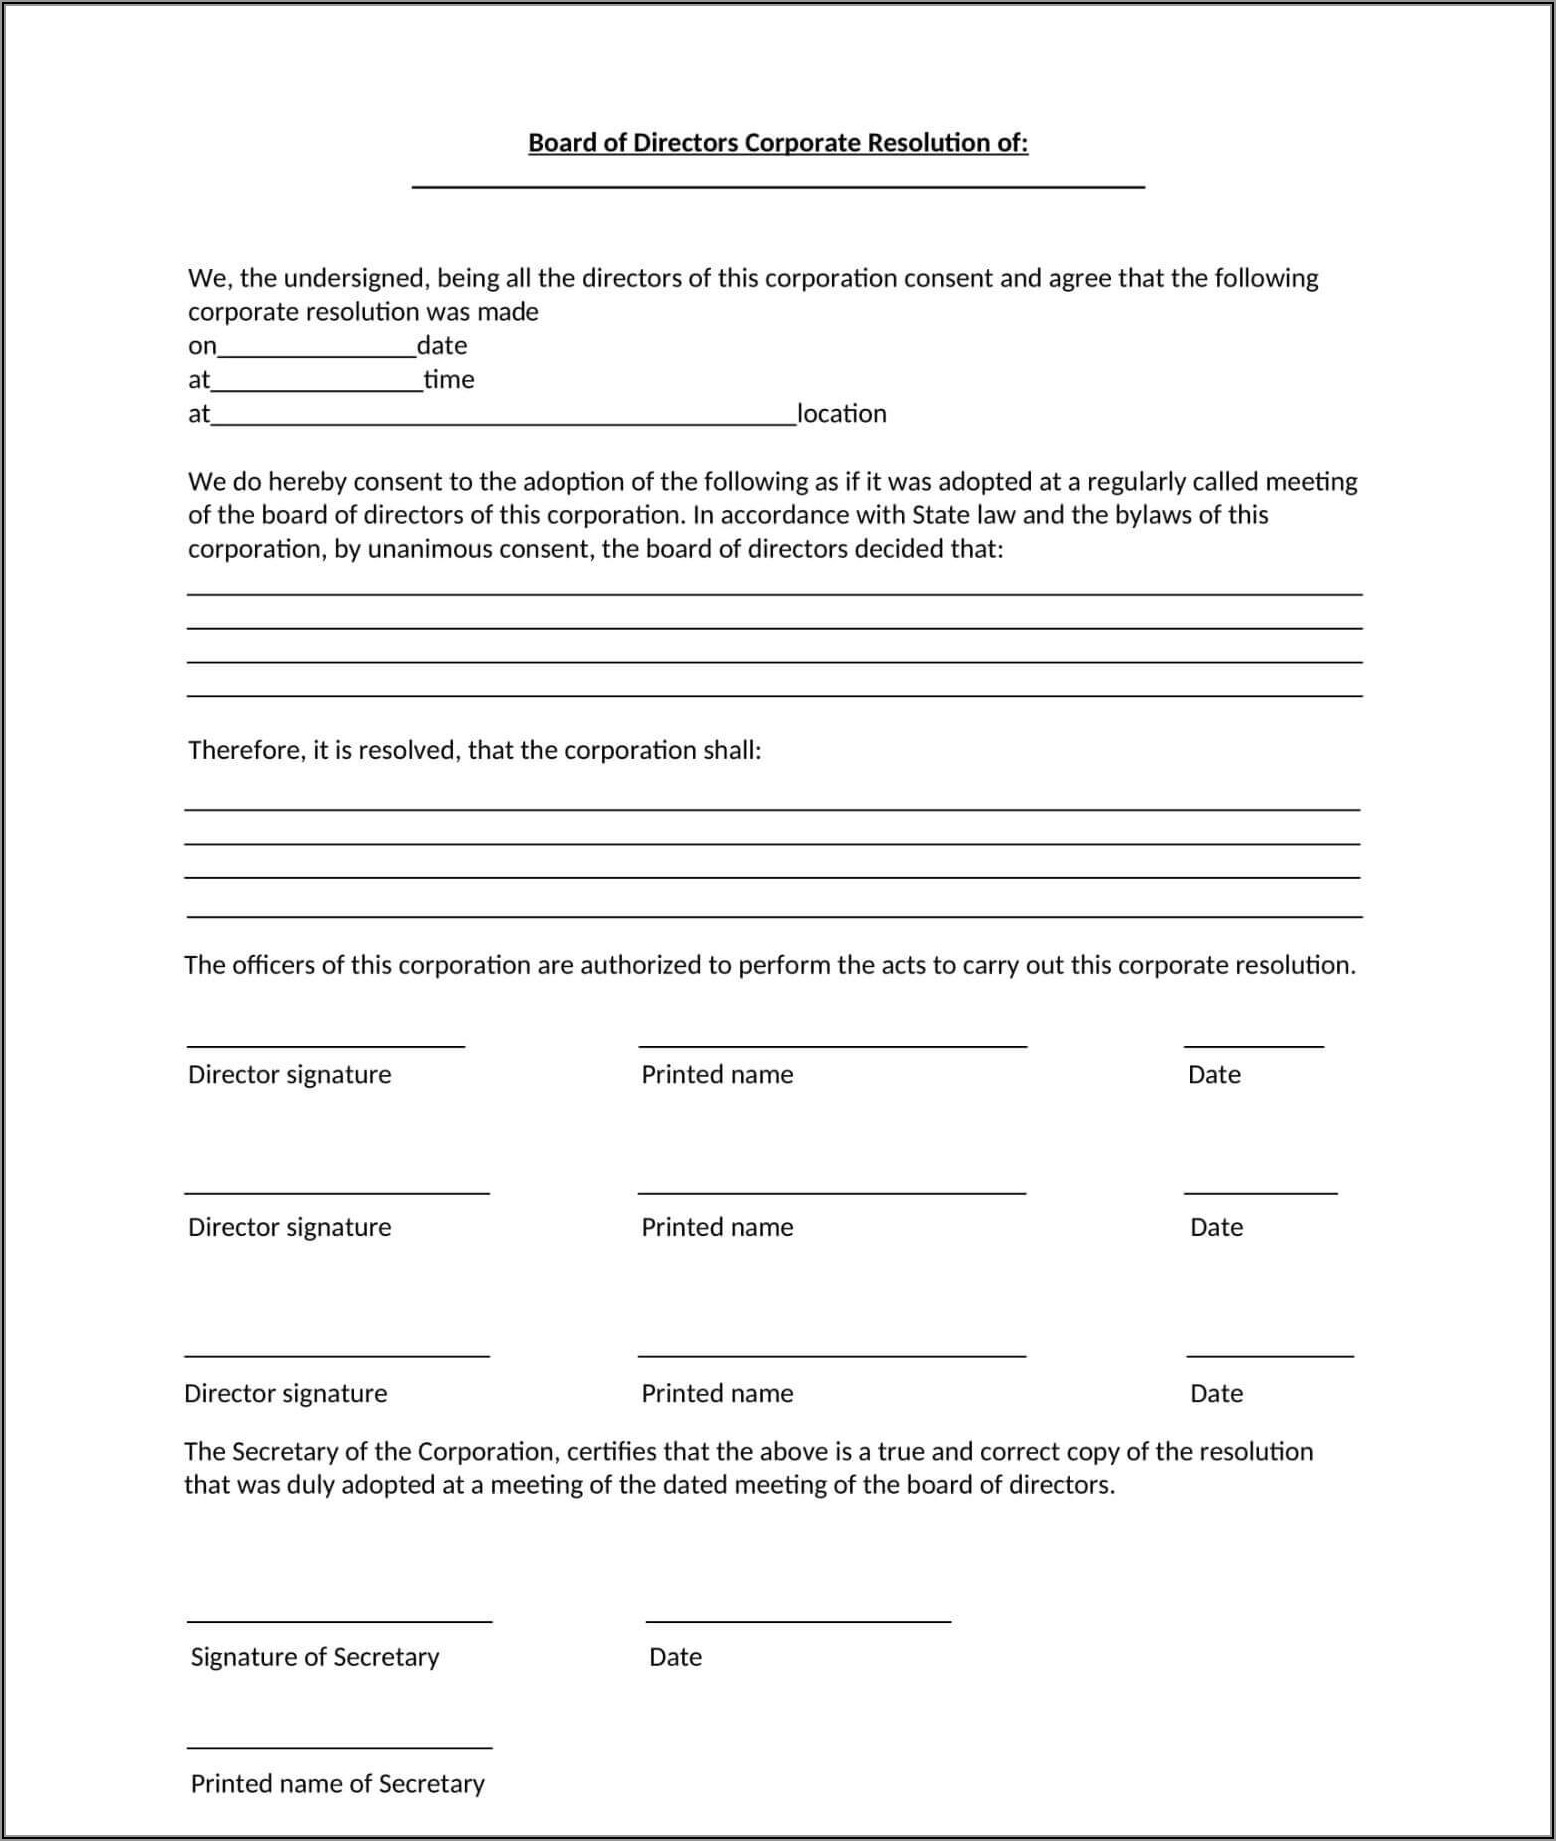 Corporate Resolution Forms Samples